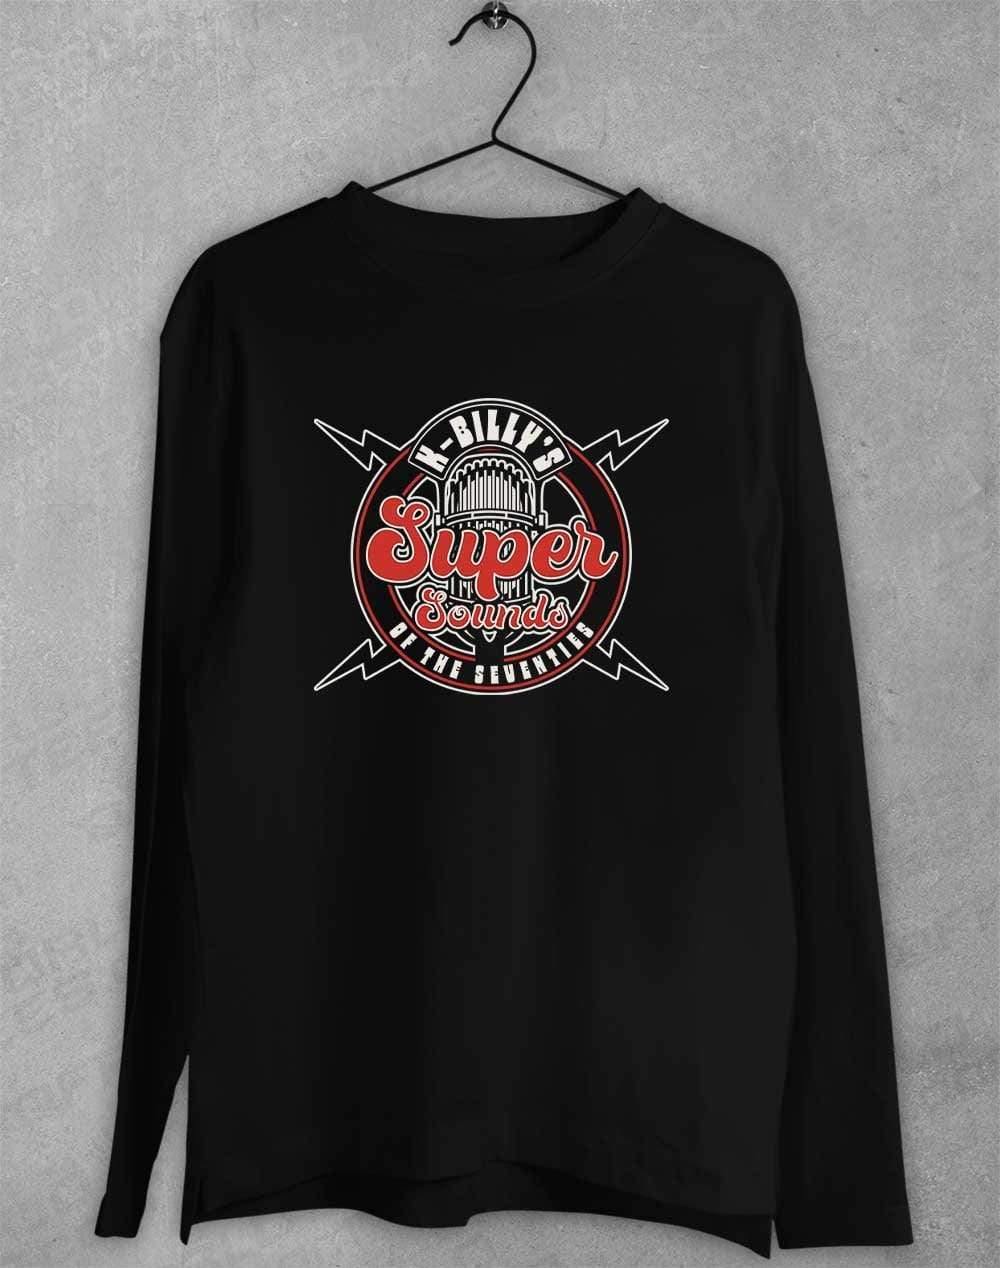 K-Billy's Super Sounds of the 70's Long Sleeve T-Shirt S / Black  - Off World Tees